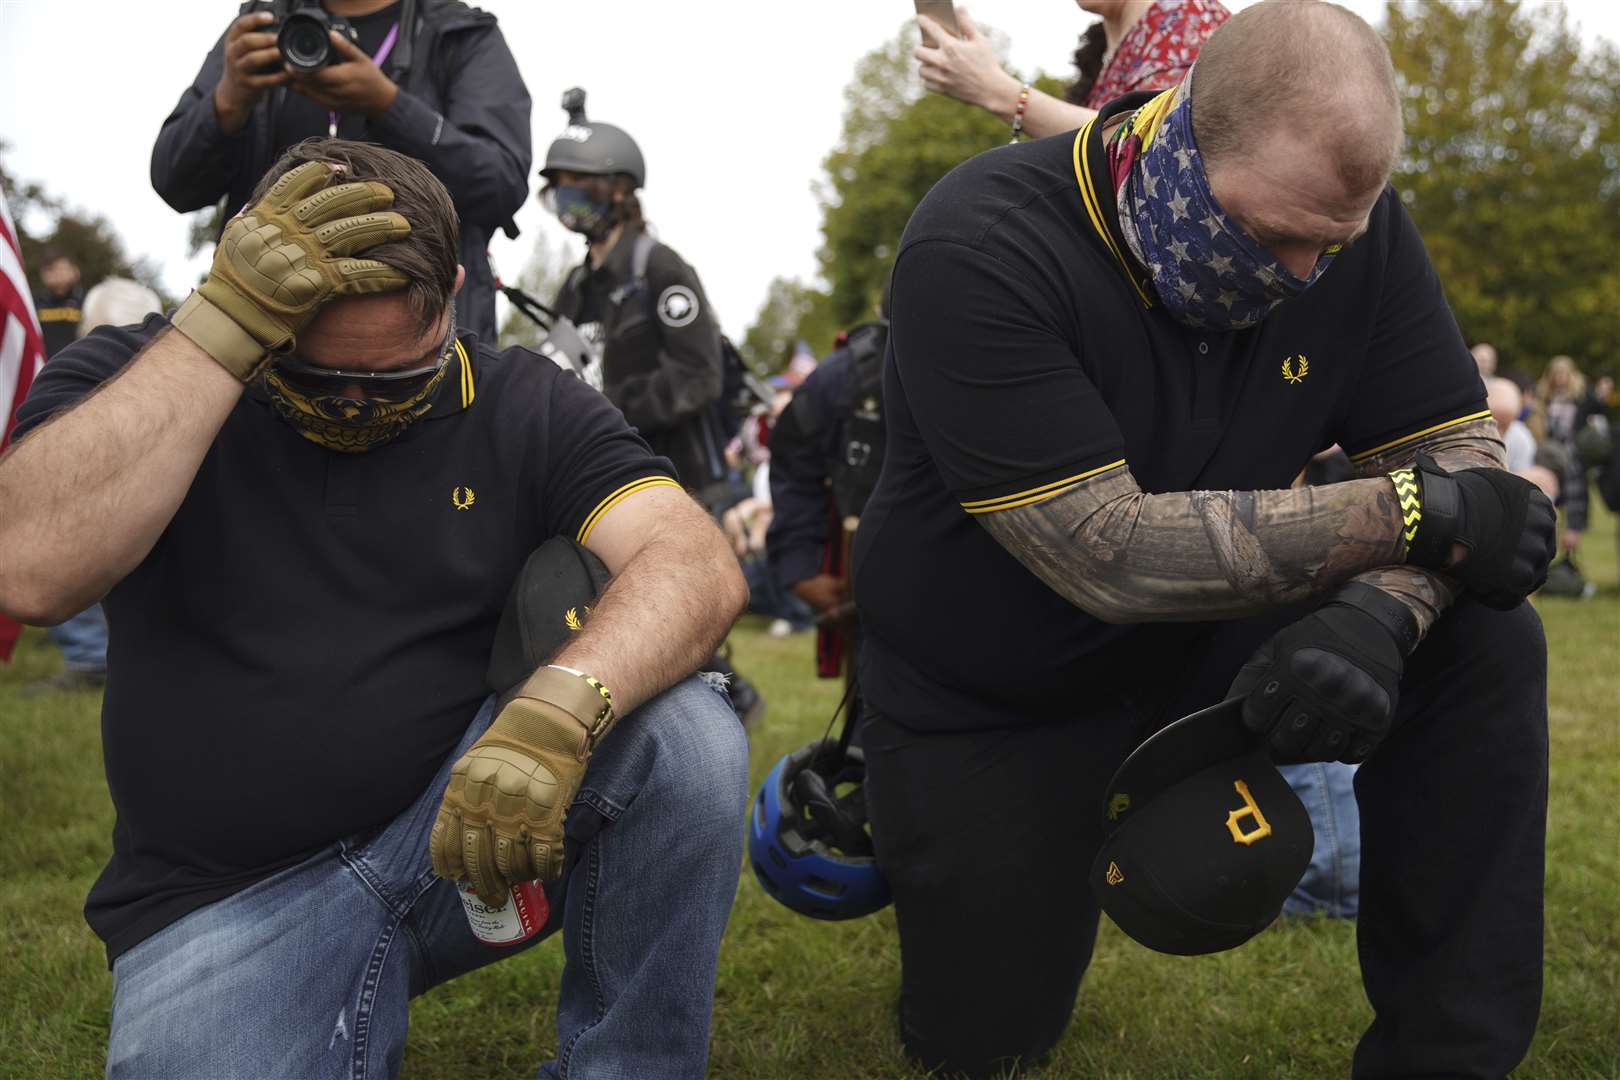 Proud Boys members in Fred Perry shirts during a march in Portland last Saturday (Allison Dinner/AP)